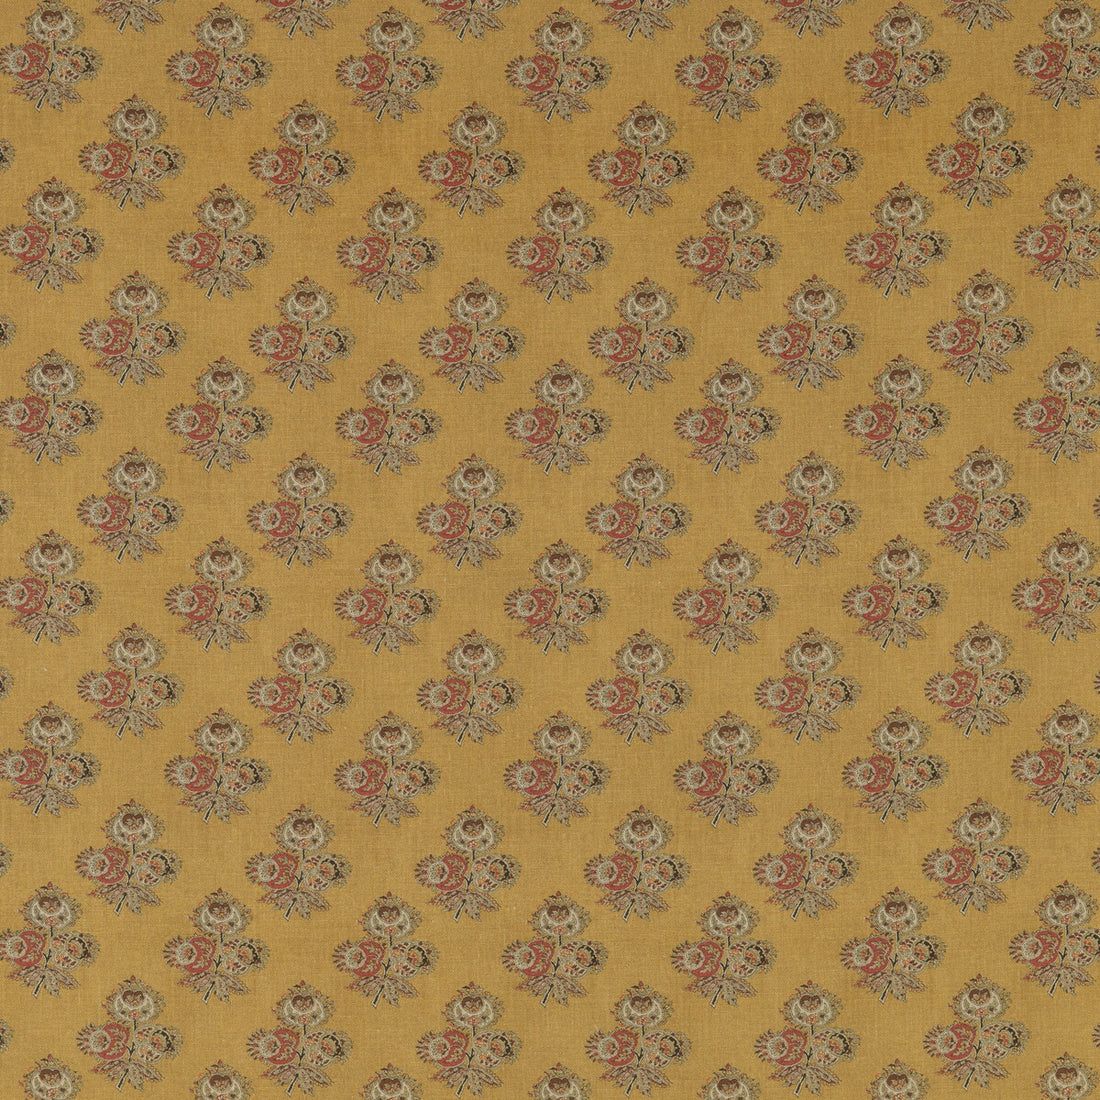 Poppy Paisley fabric in ochre color - pattern BP10823.3.0 - by G P &amp; J Baker in the Coromandel Small Prints collection